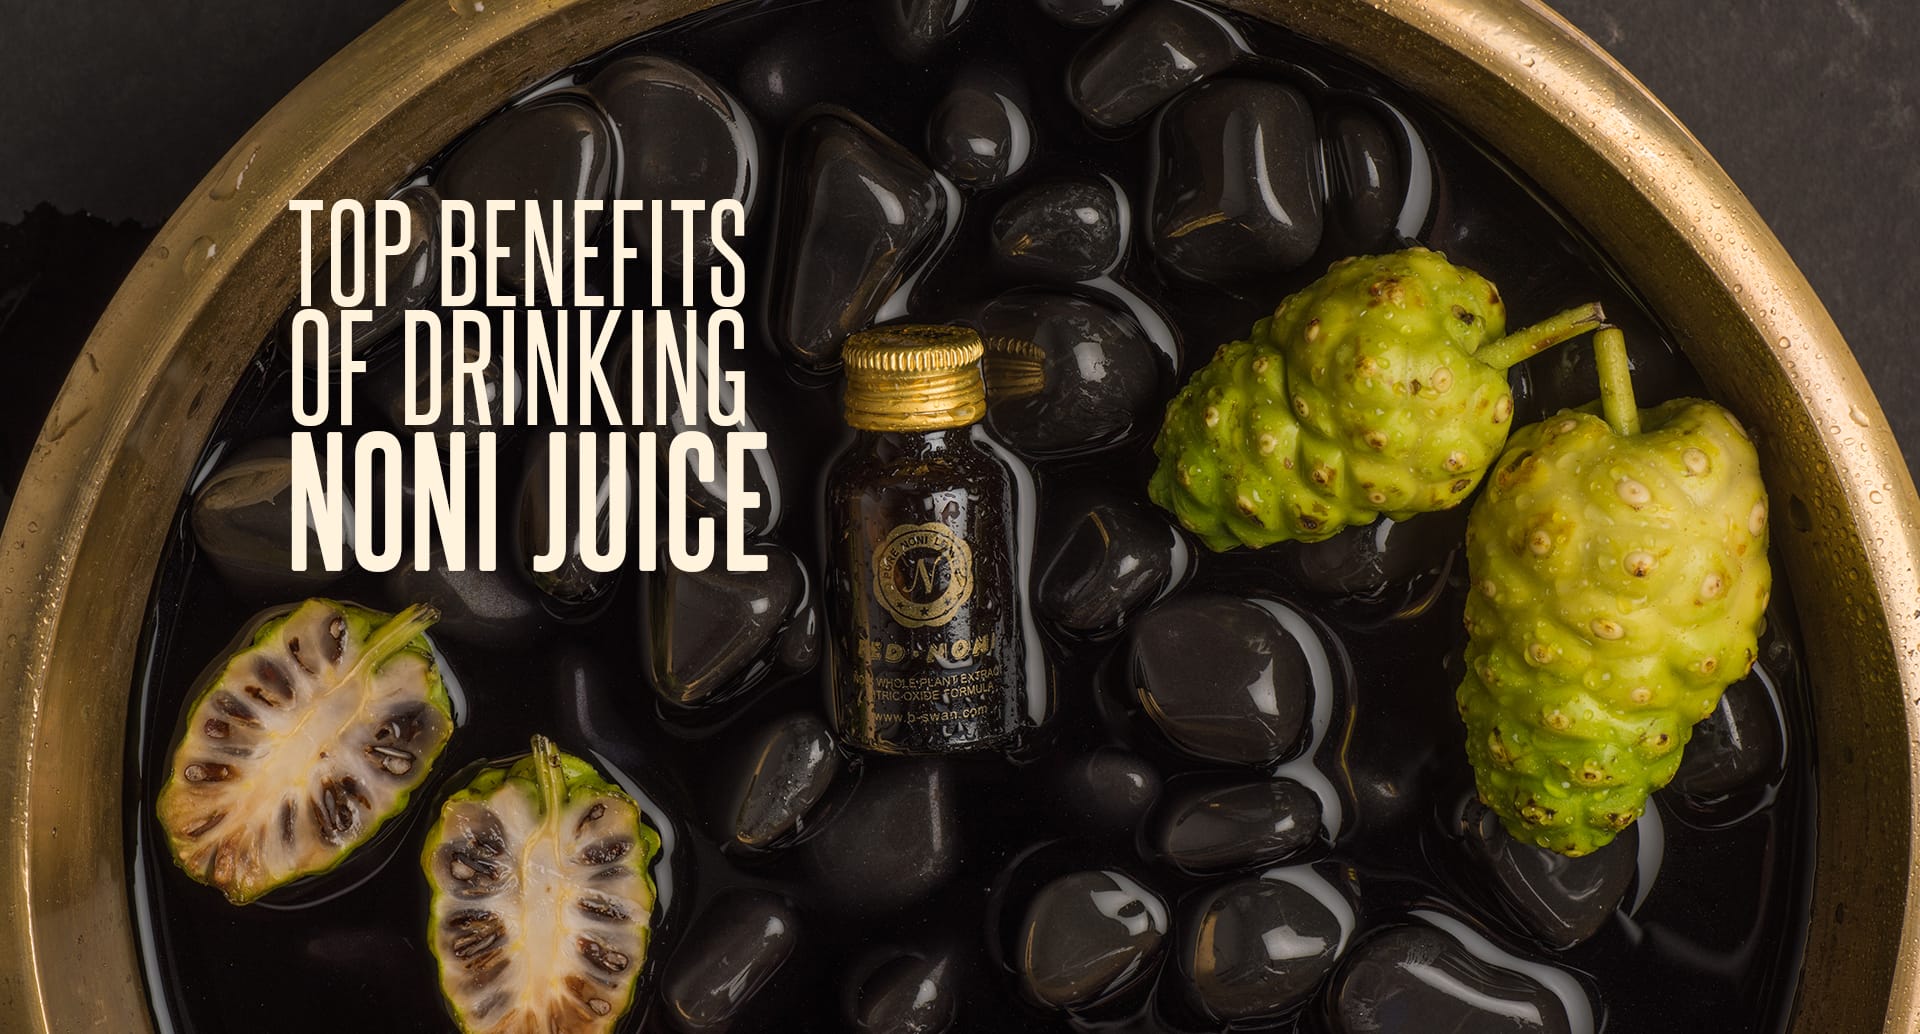 TOP BENEFITS OF DRINKING NONI JUICE